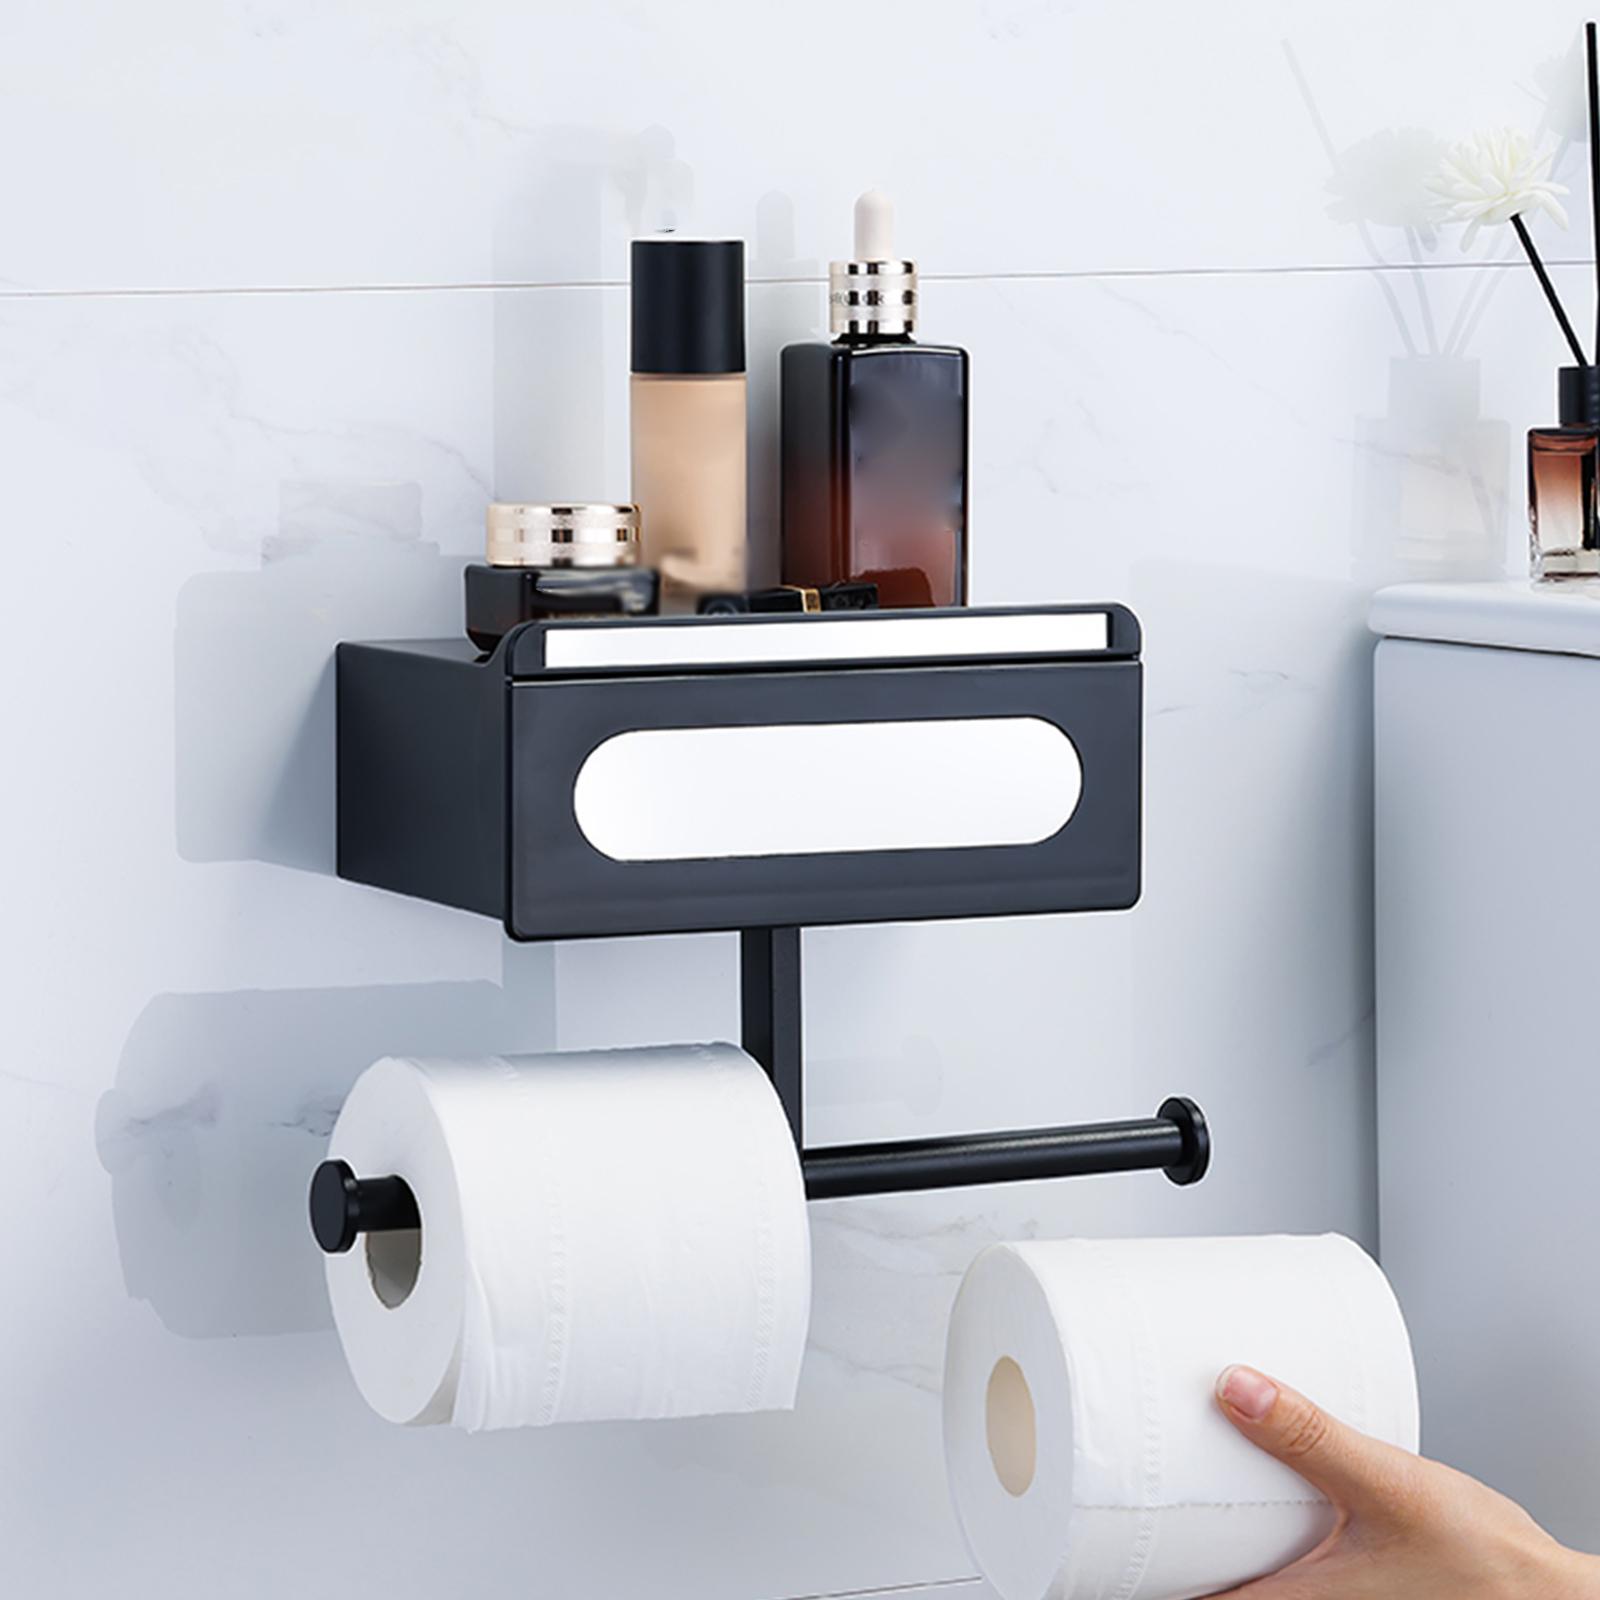 Wall Mounted Toilet Paper Holder Multifunctional Toilet Paper Roll Dispenser Black Style B